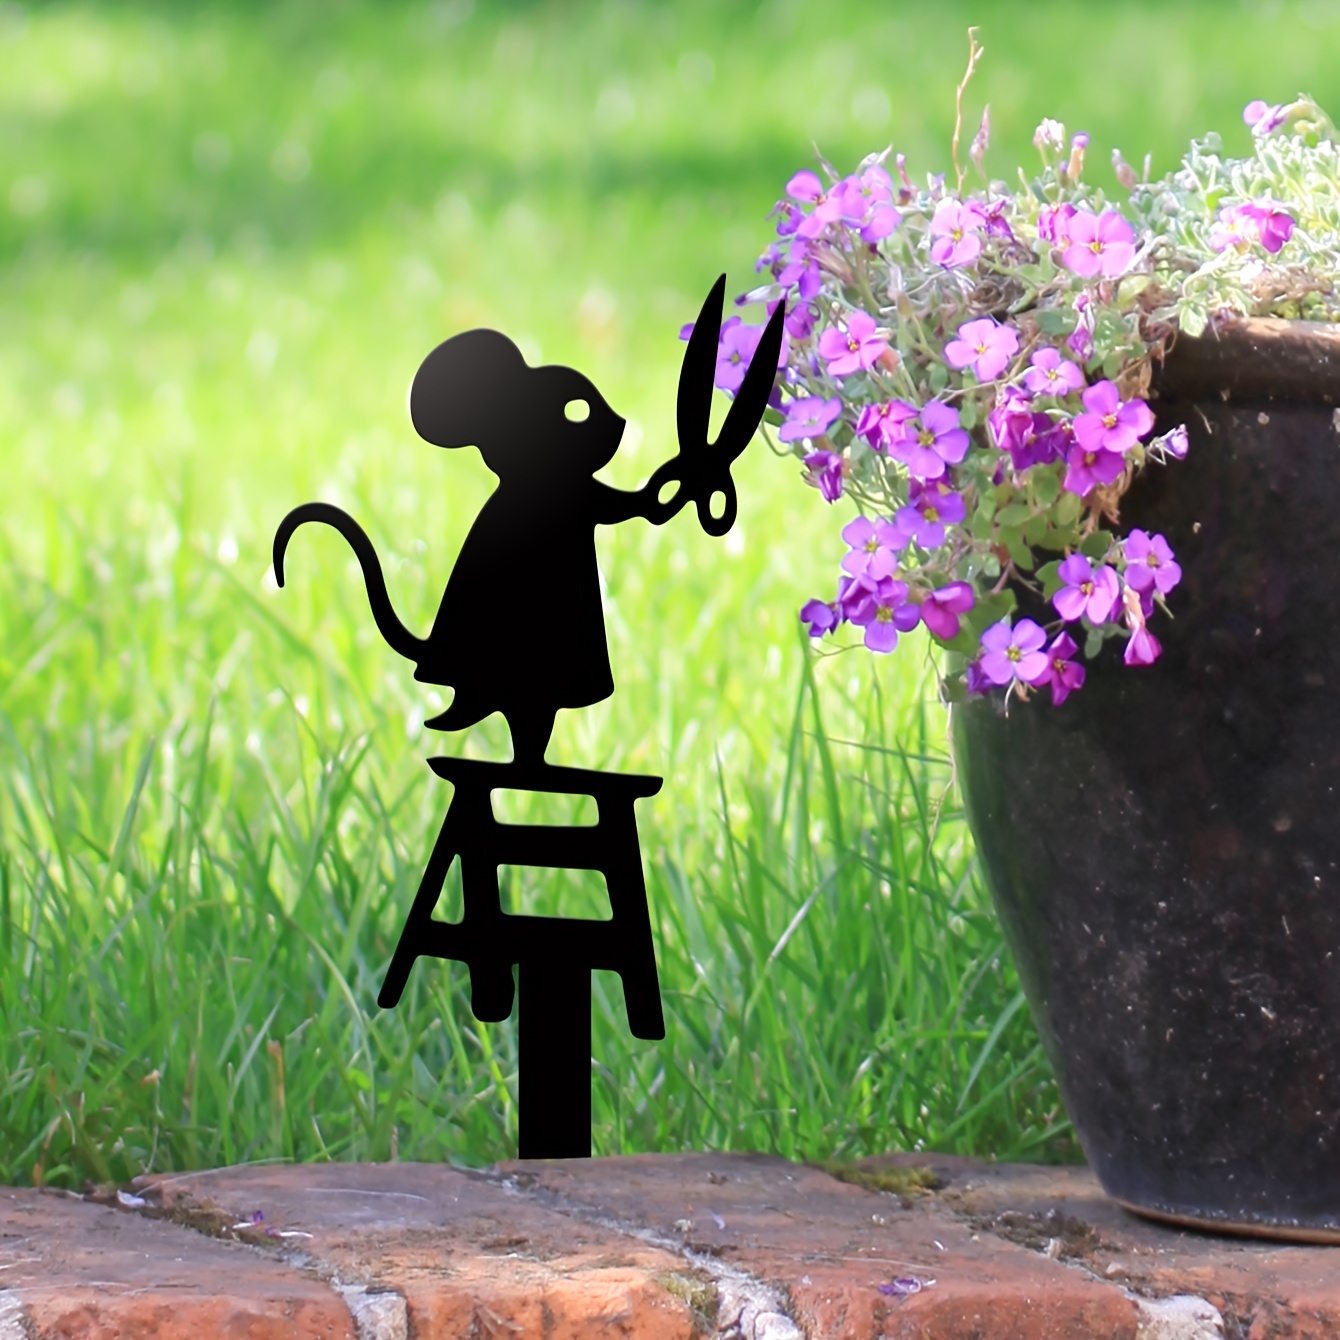 

1pc Metal Garden Stake Silhouette, Mouse With Scissors Design, 6.7x2.7 Inches Decorative Art Lawn Yard Sign, Creative Animal Sculpture Ornament, Outdoor Decor For Spring Season, Durable Metal Material